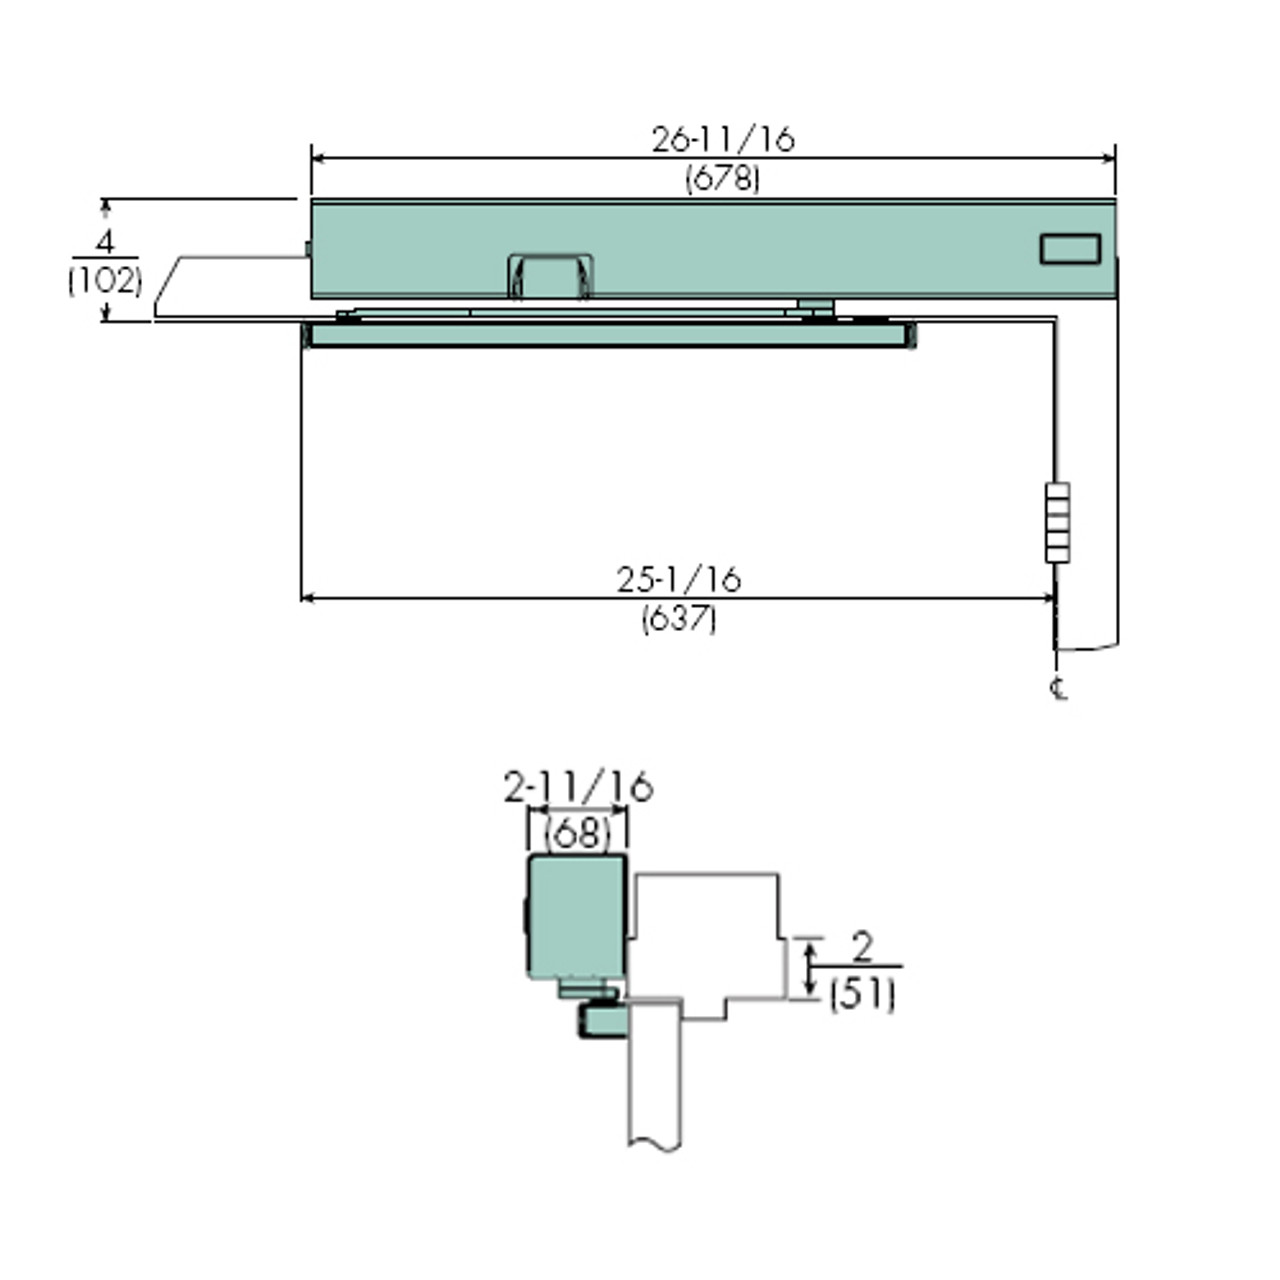 7153SZ-DZ-LH-120VAC-689 Norton 7100SZ Series Safe Zone Multi-Point Closer/Holder with Motion Sensor and Pull Side Double Egress Arm and Slide Track in Aluminum Finish